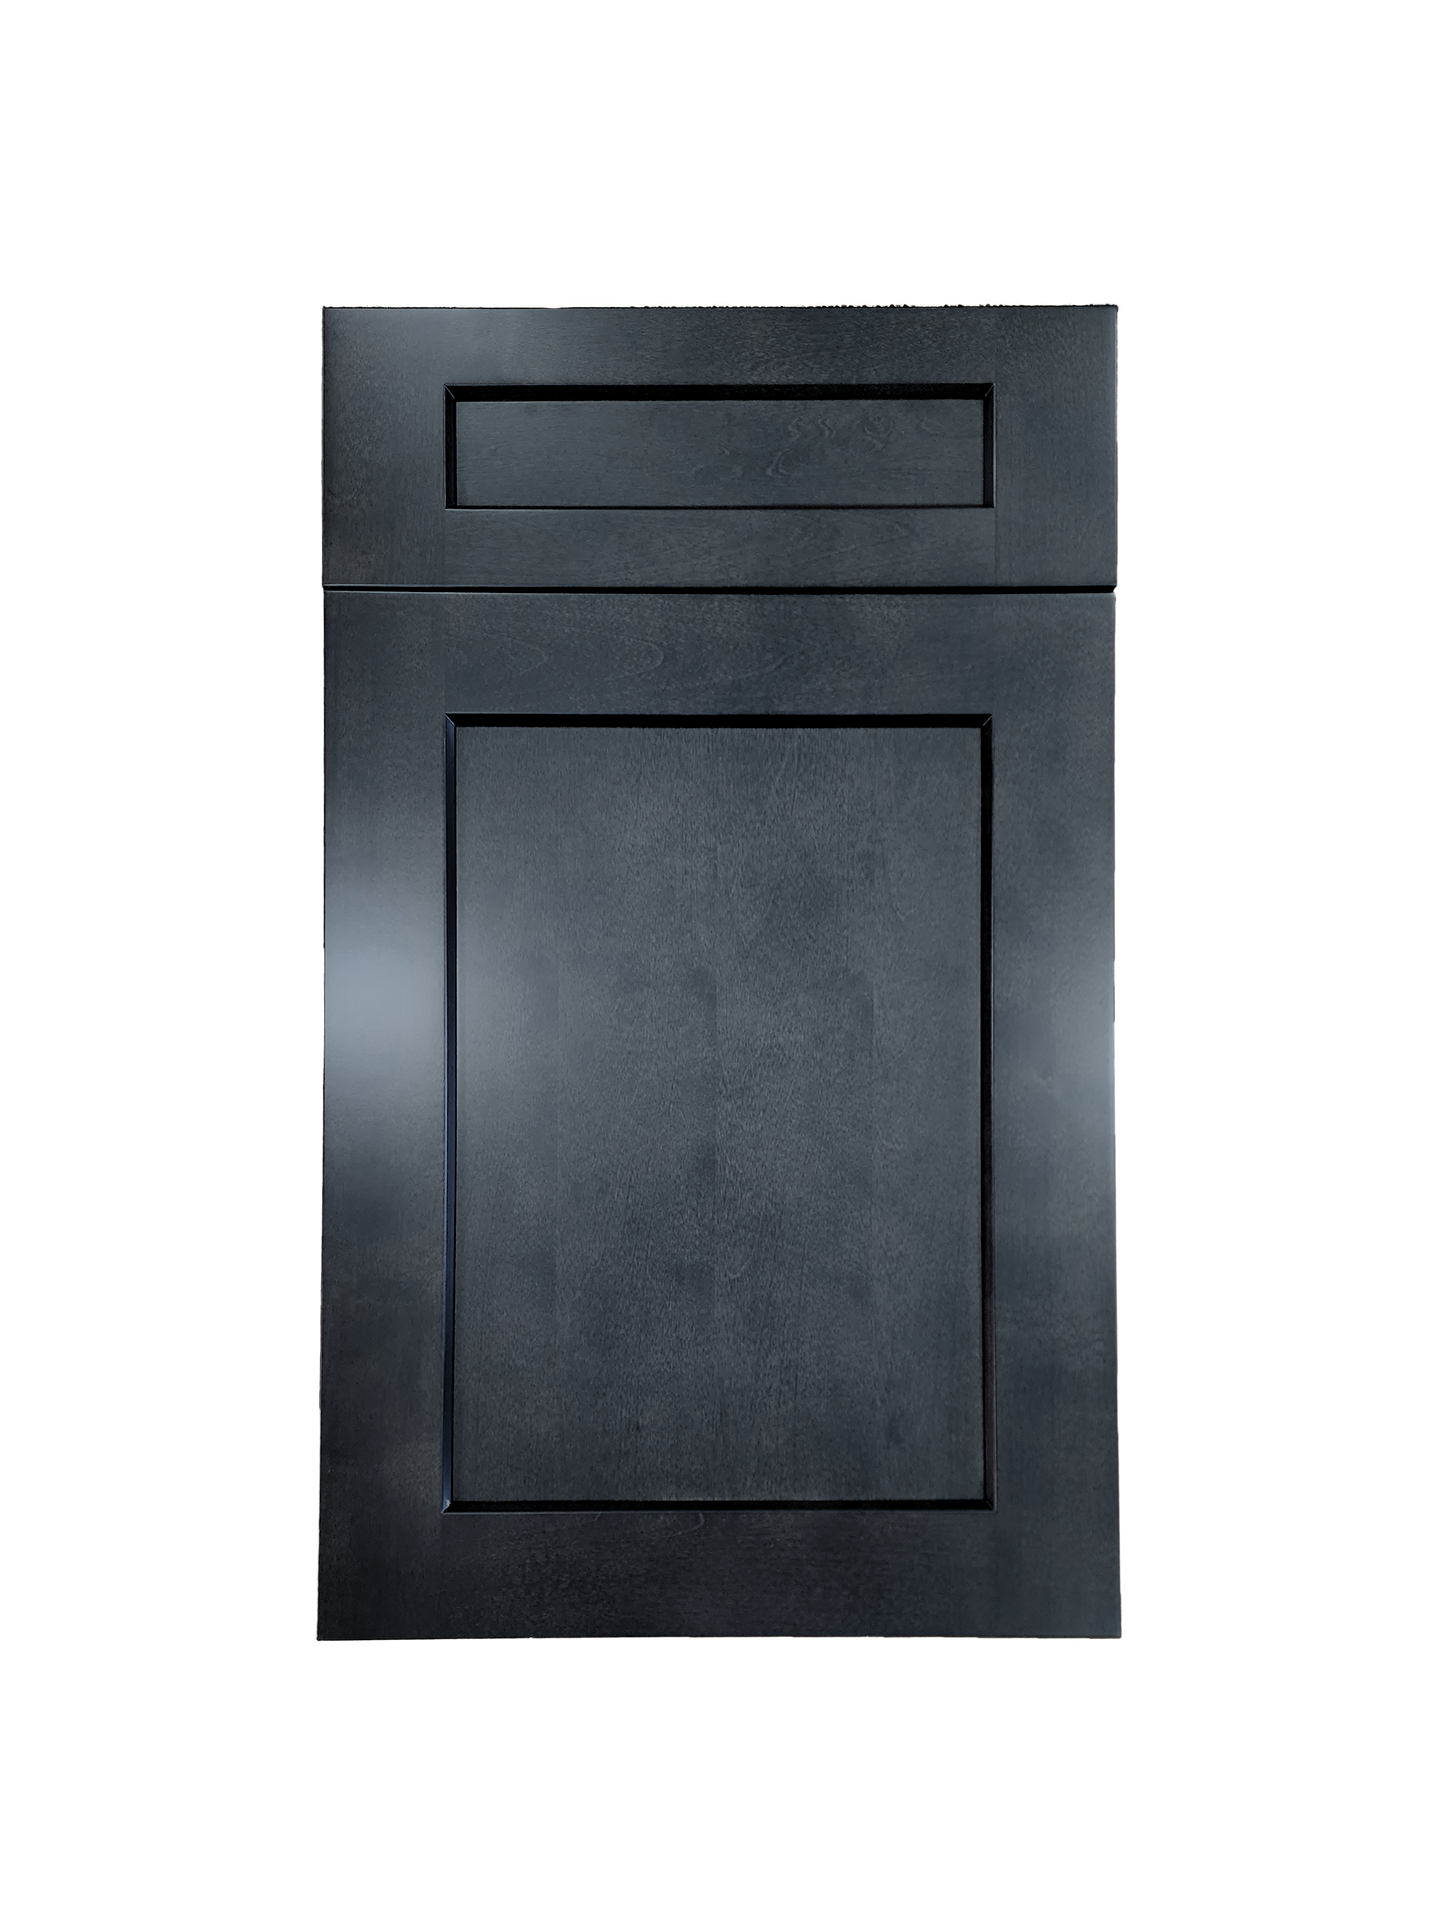 Stormy Grey Wall Cabinet 12 inches wide 12 inches deep 36 inches tall with Stormy Grey box and Stormy Grey doors